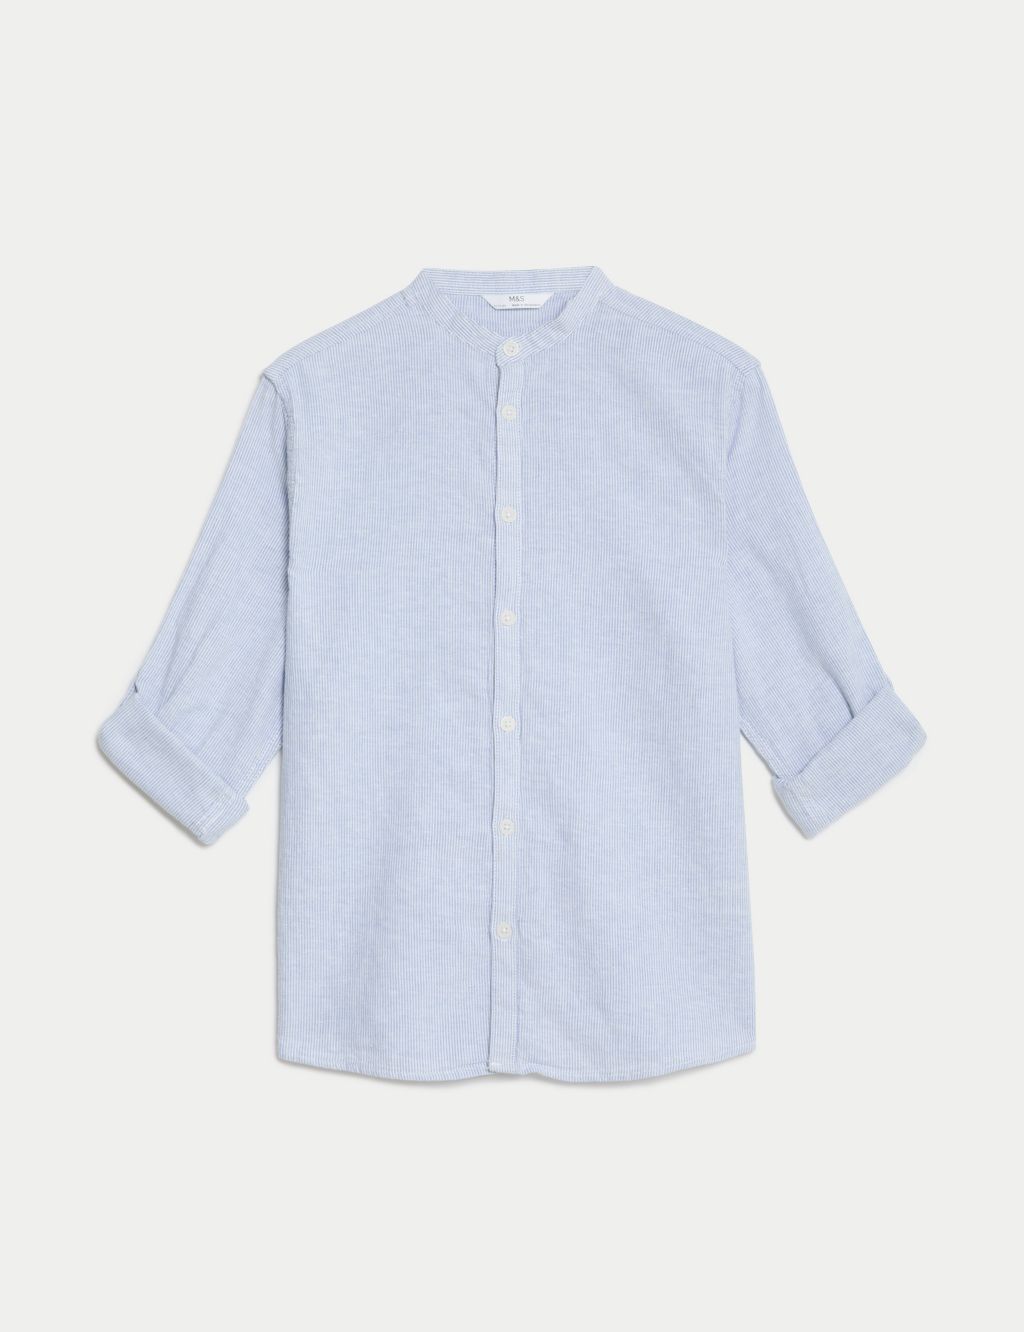 Cotton Rich Textured Shirt (6-16 Years) image 2